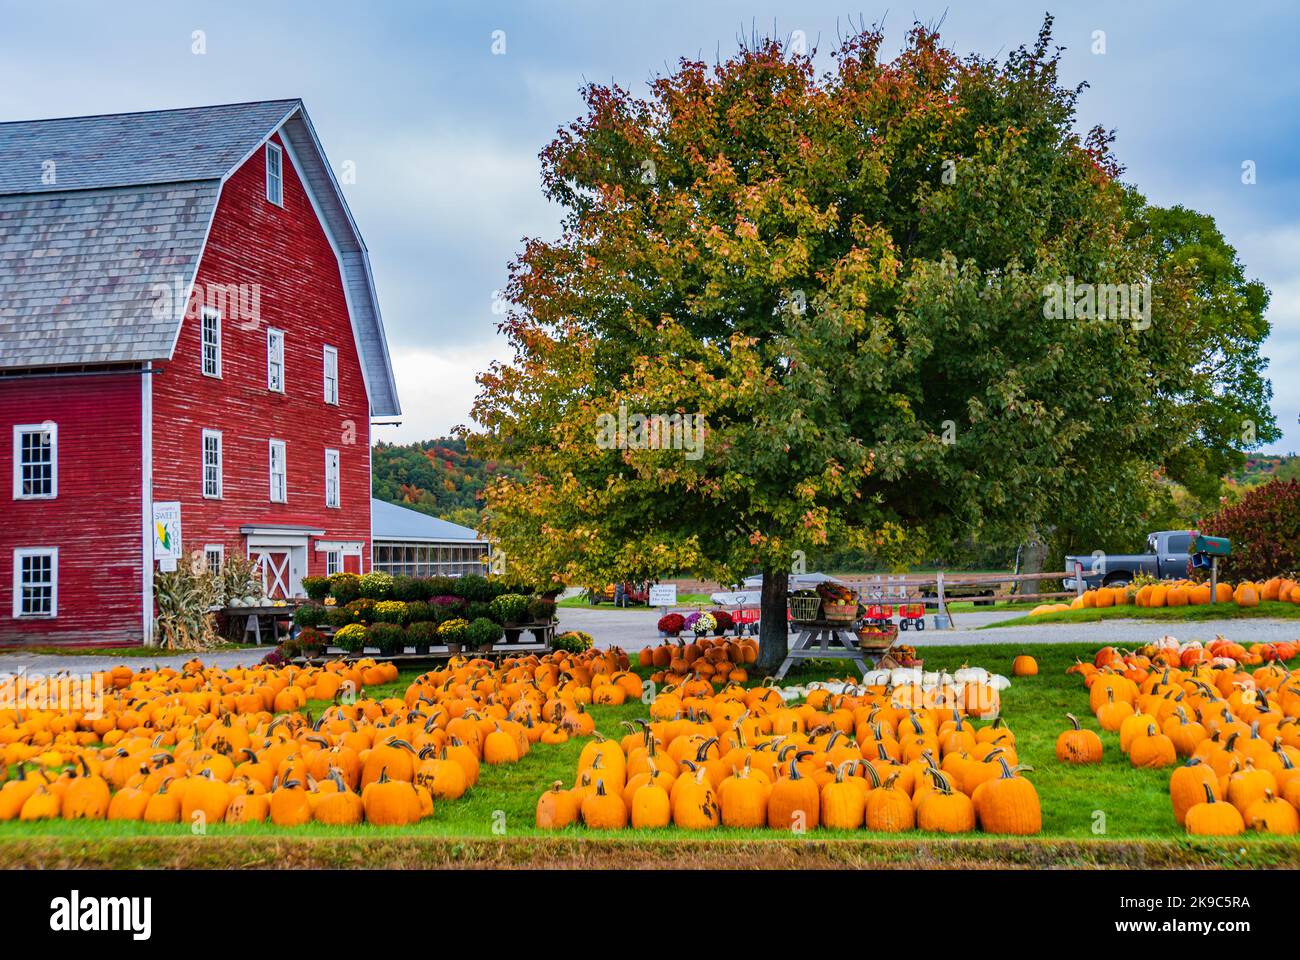 rural farm with holiday pumpkins for sale out on the lawn in october Stock Photo